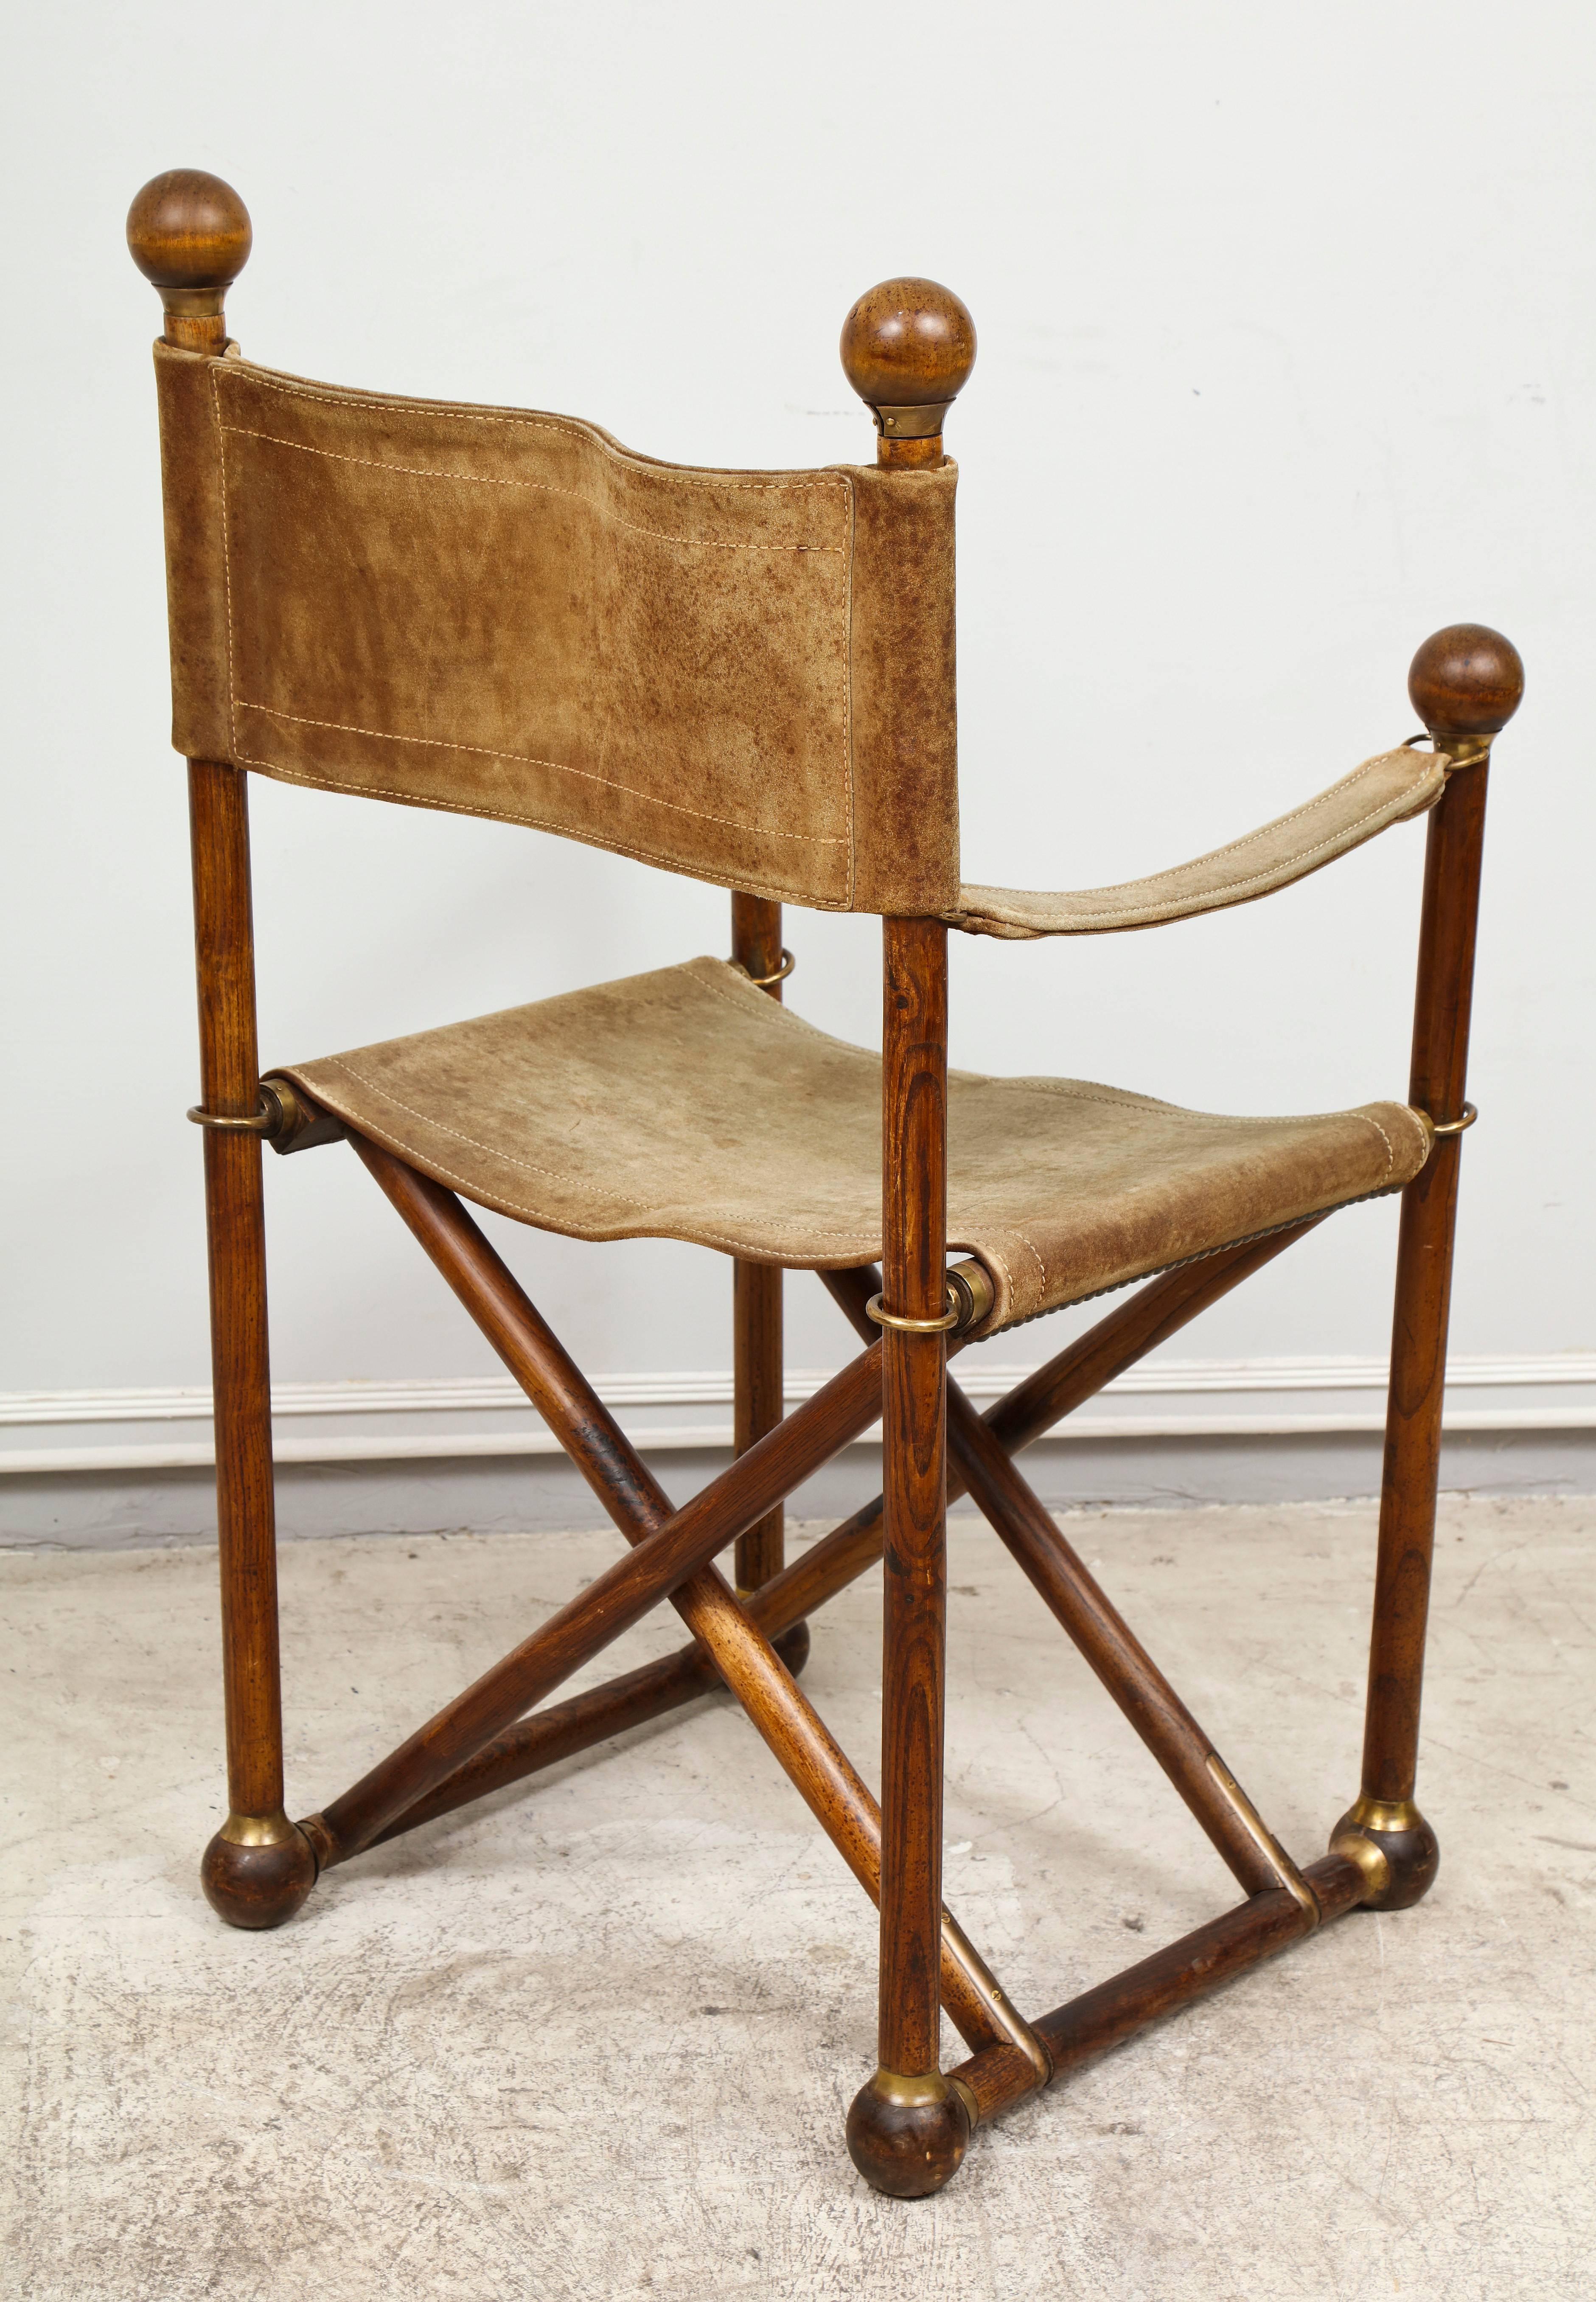 20th Century Pair of Hand-Stitched Director's Chairs with Brass Hardware